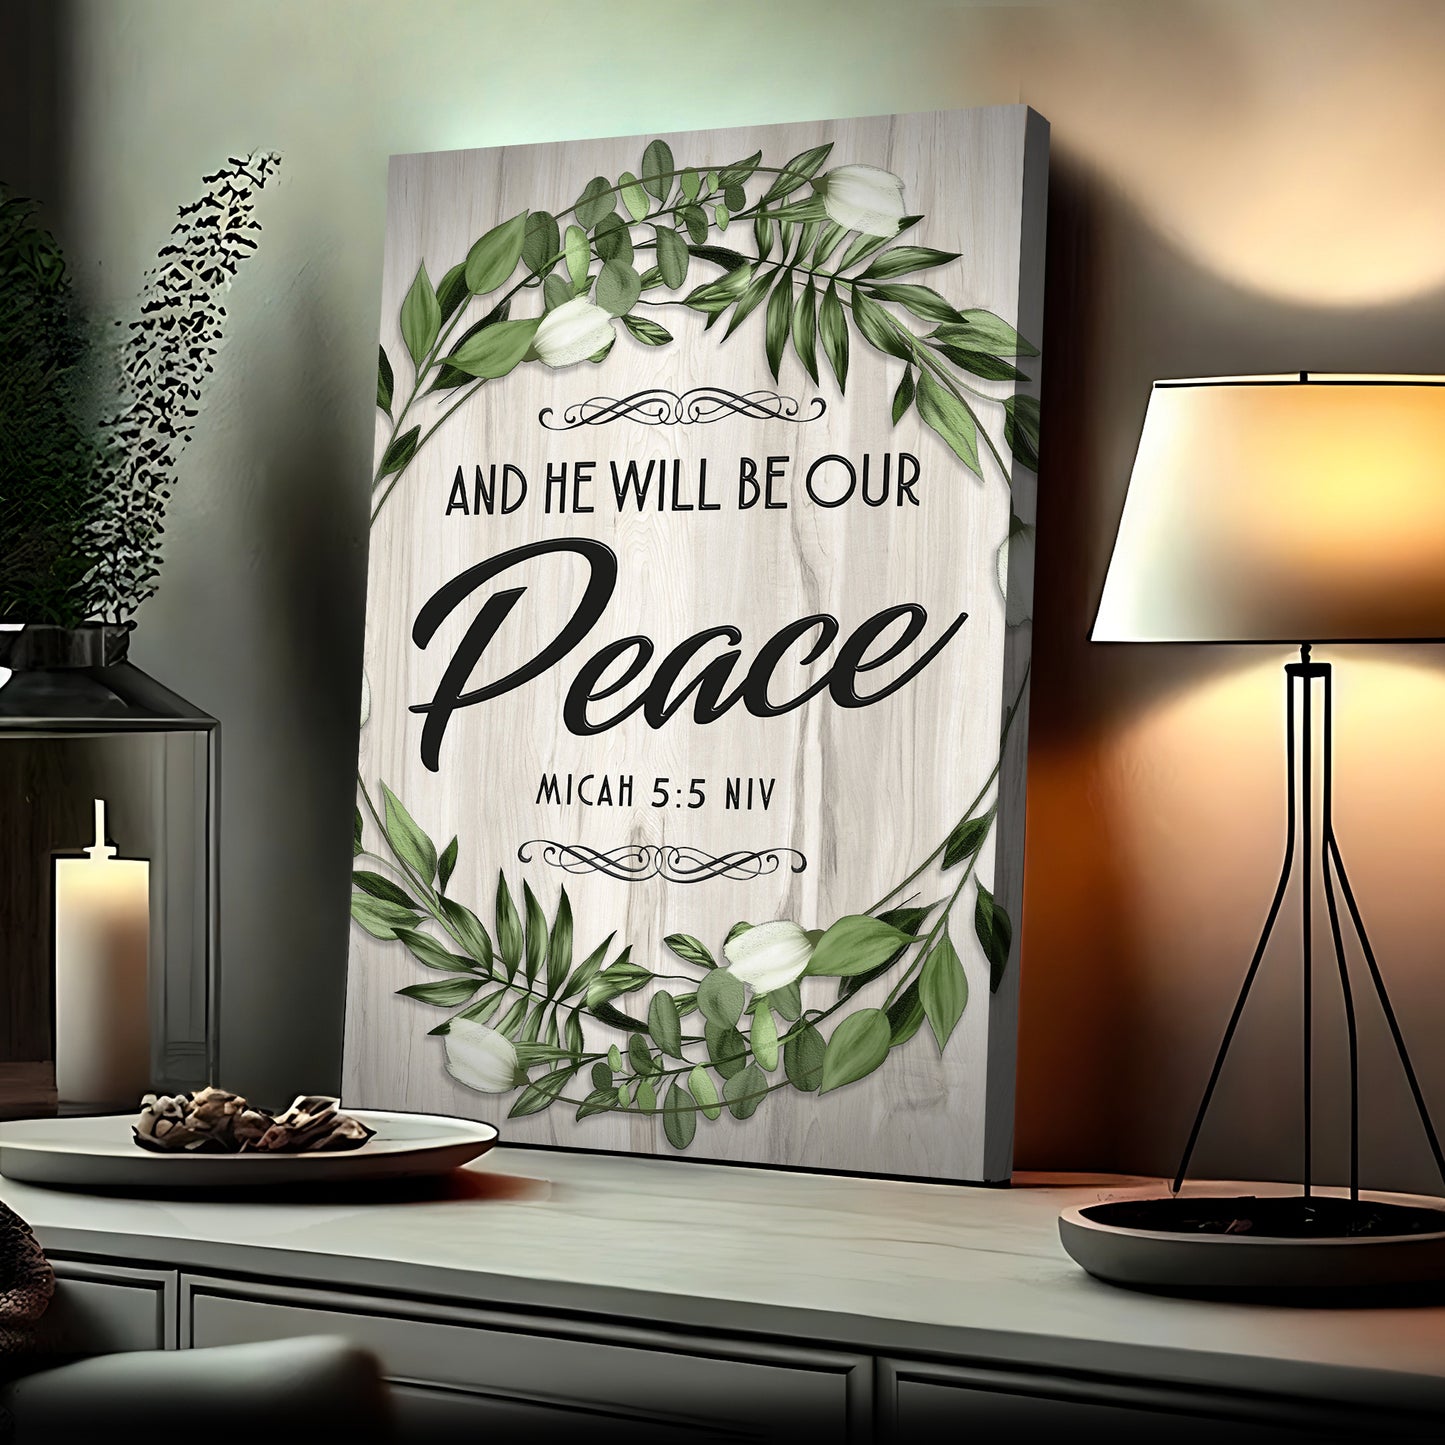 Micah 5:5 NIV And He Will Be Our Peace Sign  - Image by Tailored Canvases